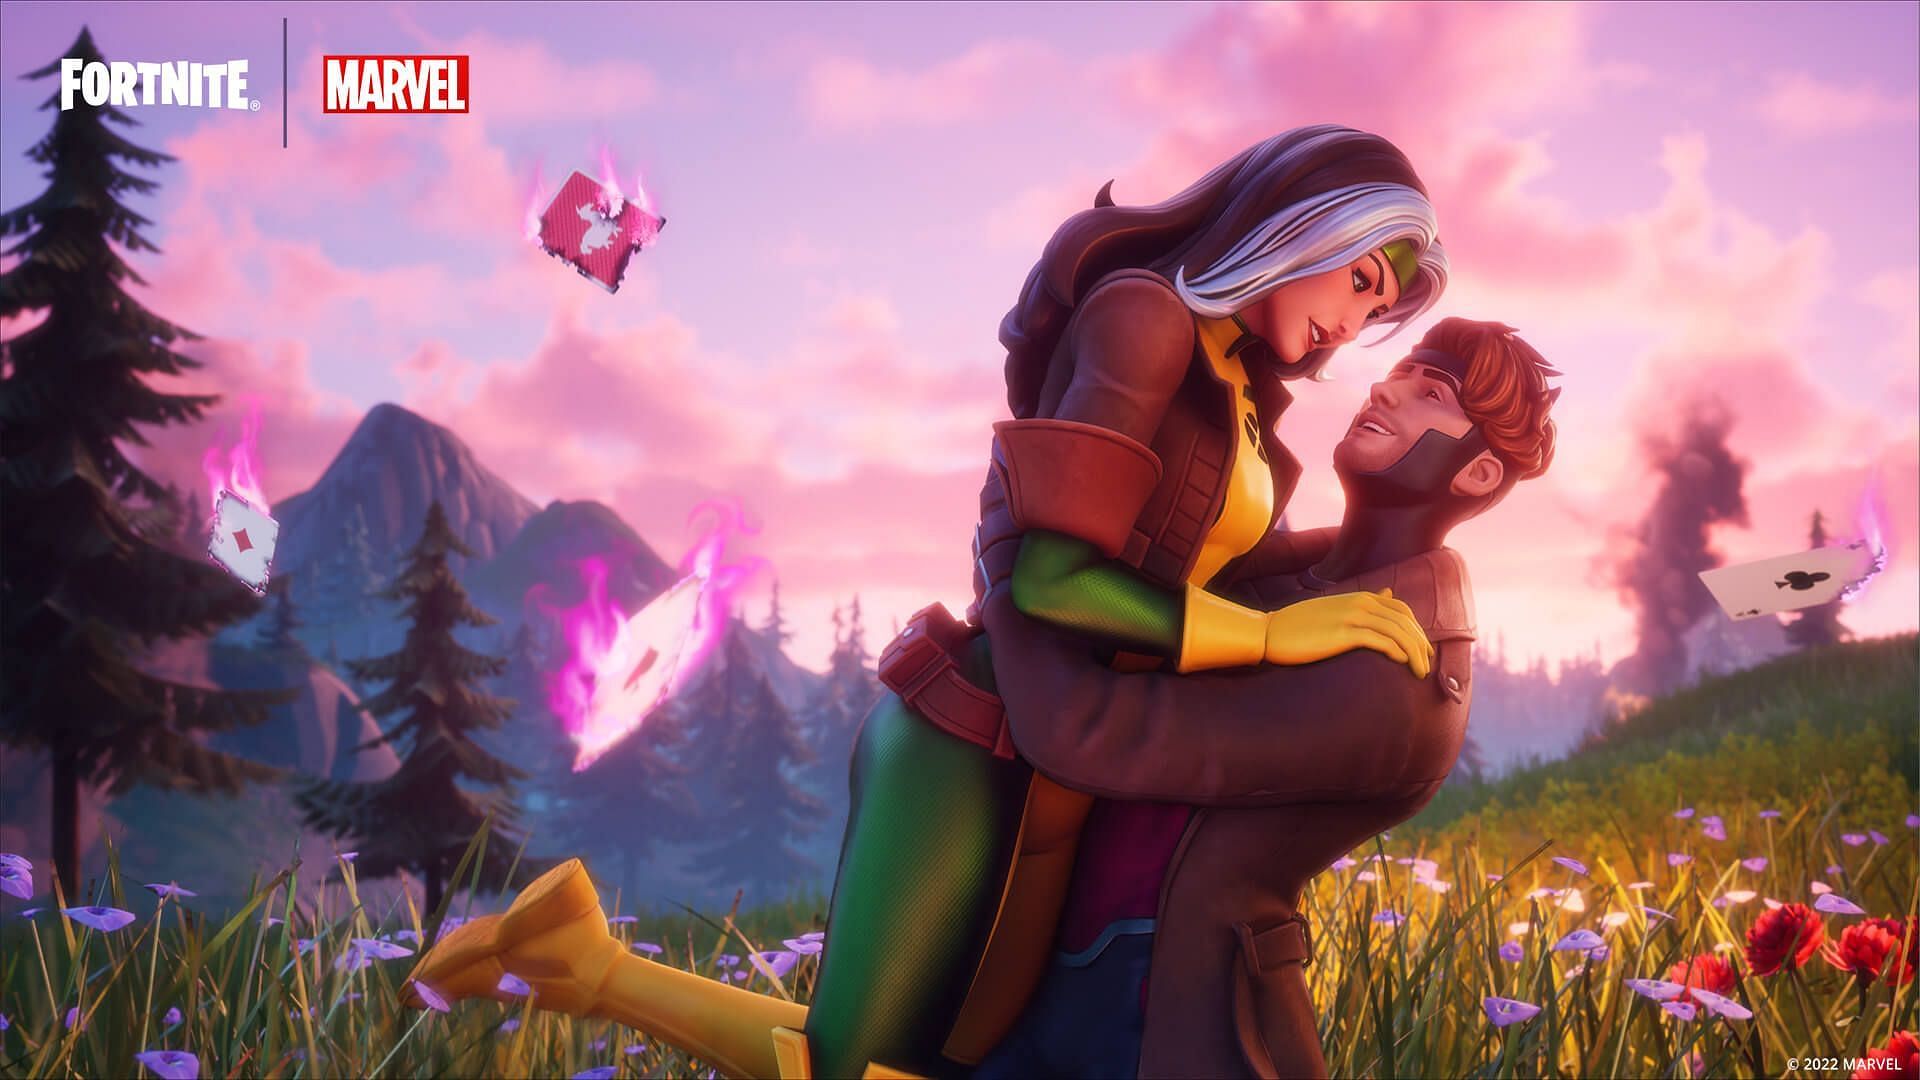  Rogue and Gambit are in Fortnite (Image via Epic Games/Fortnite)